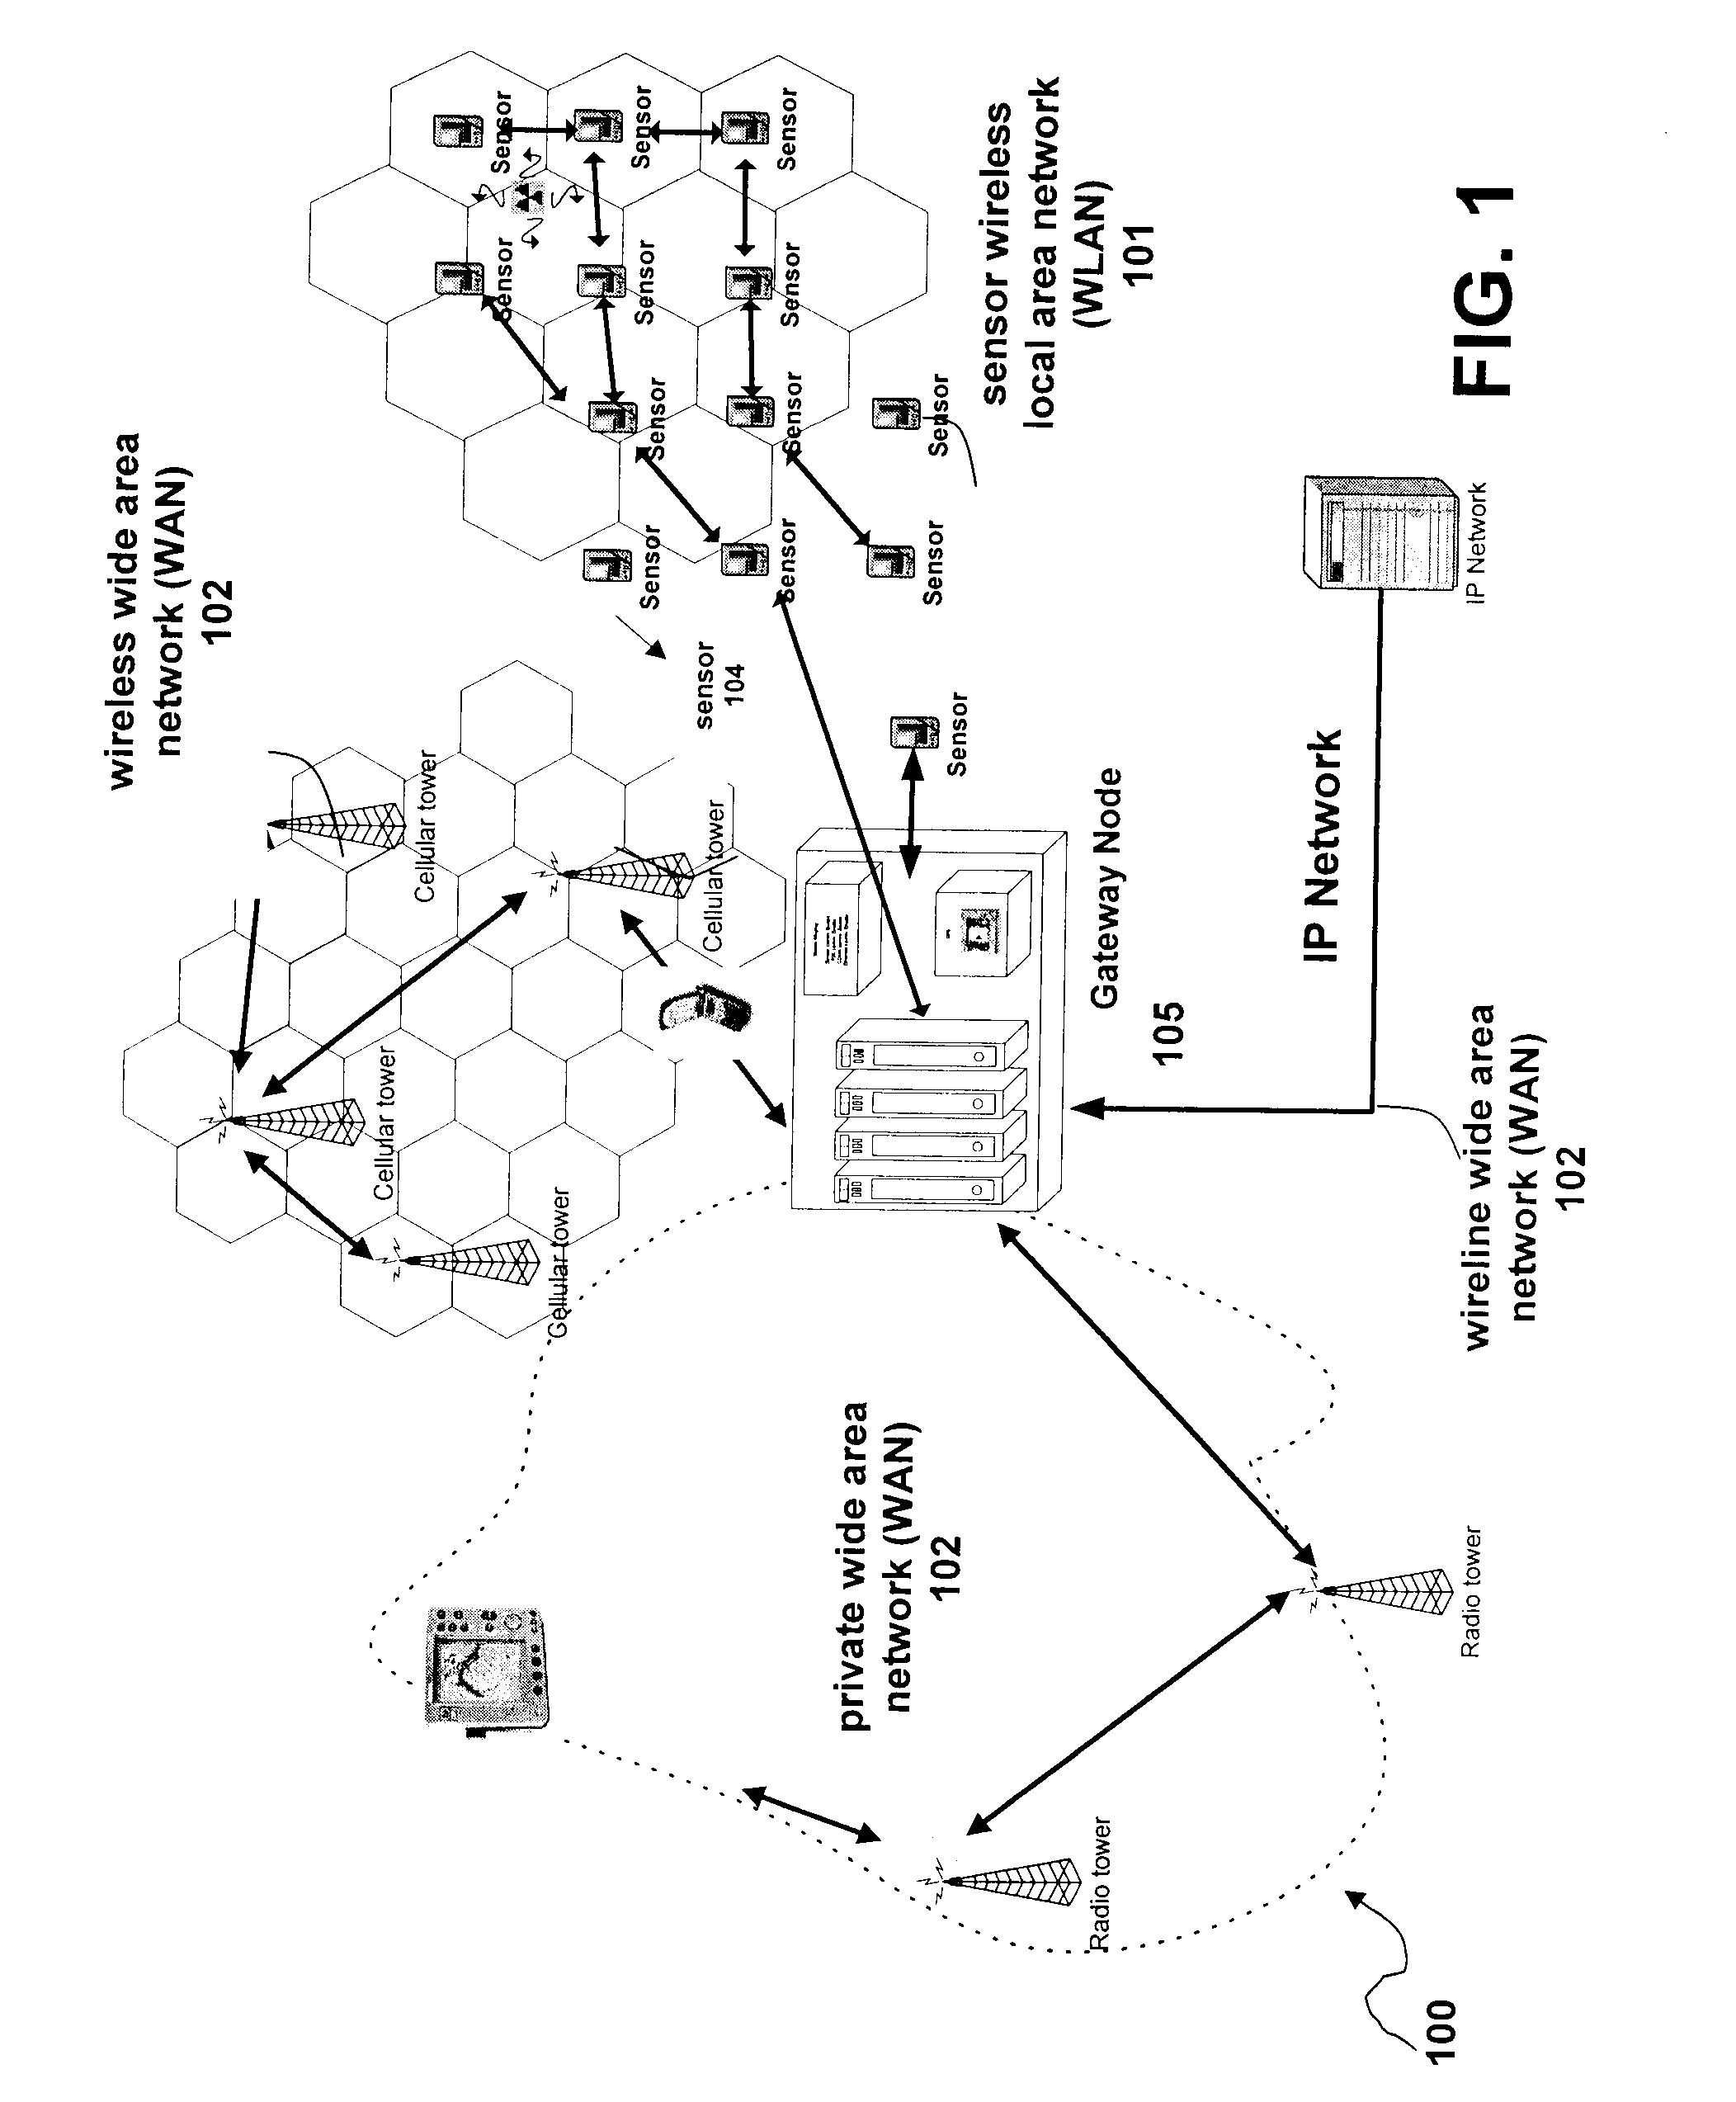 Method and Apparatus for Management of a Global Wireless Sensor Network